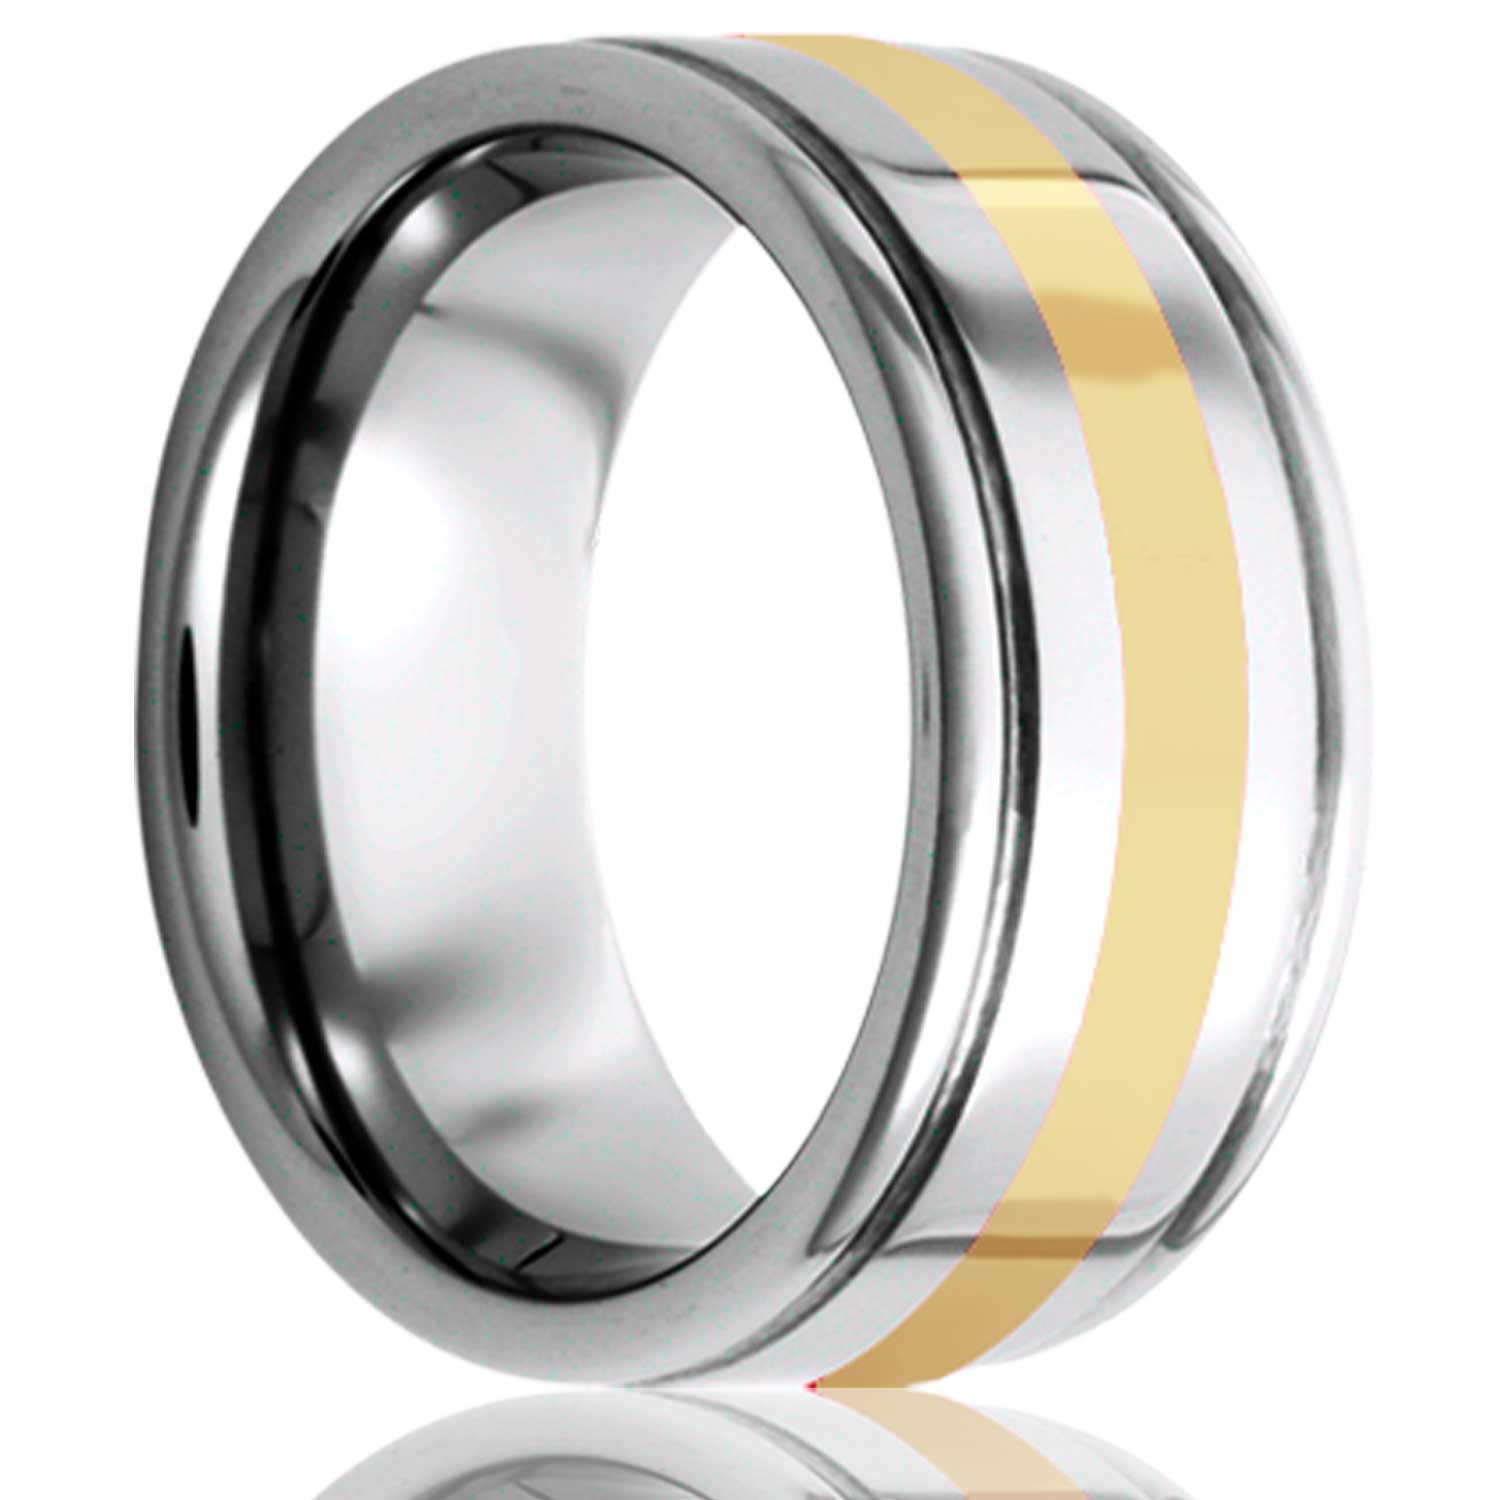 A 14k yellow gold inlay cobalt wedding band with grooved edges displayed on a neutral white background.